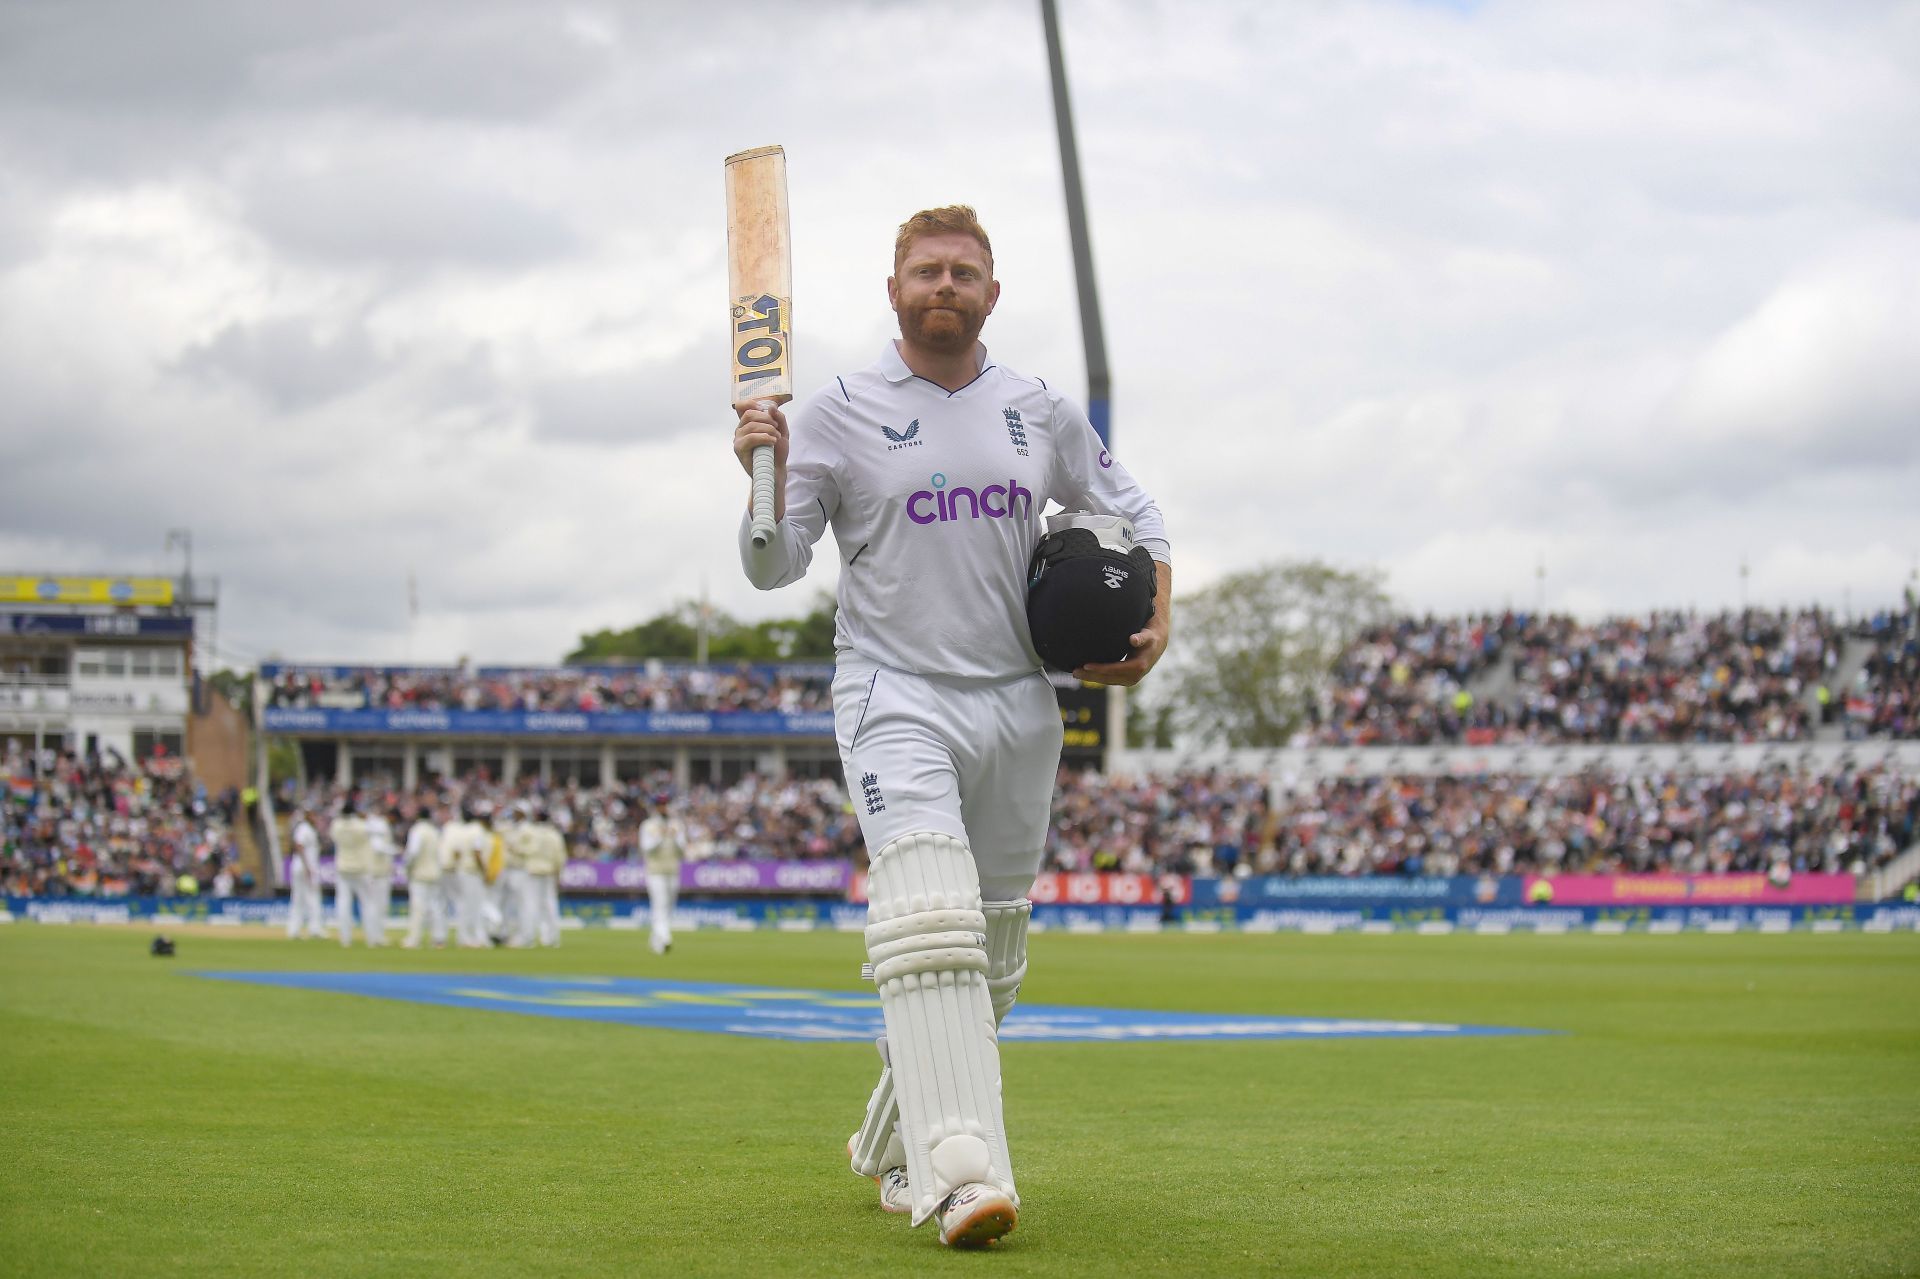 Jonny Bairstow now has the most runs in Test cricket in 2022. (Image courtesy: Getty)